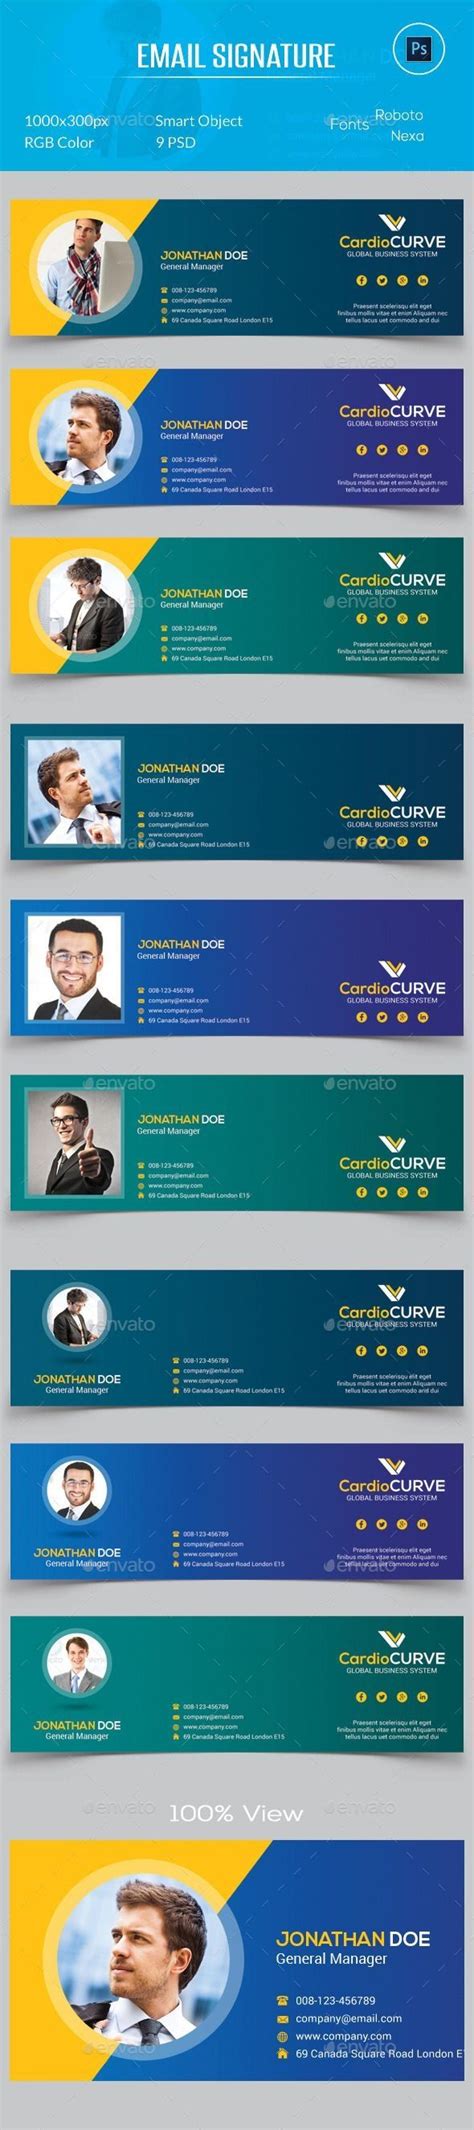 Email Signature Banner Template